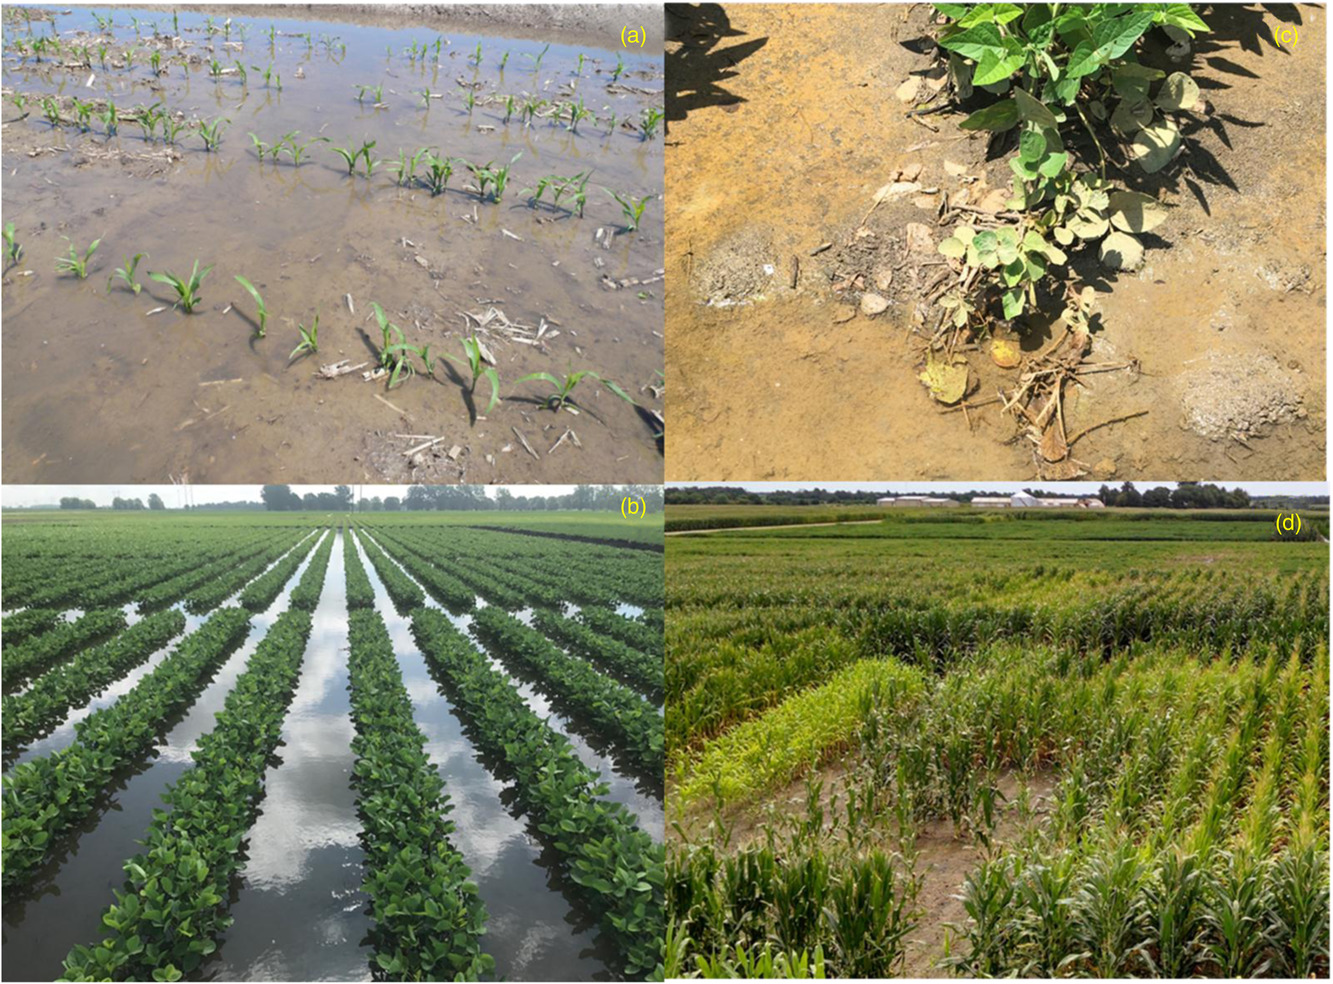 Plant Responses to Soil Salinity and Amelioration Strategies